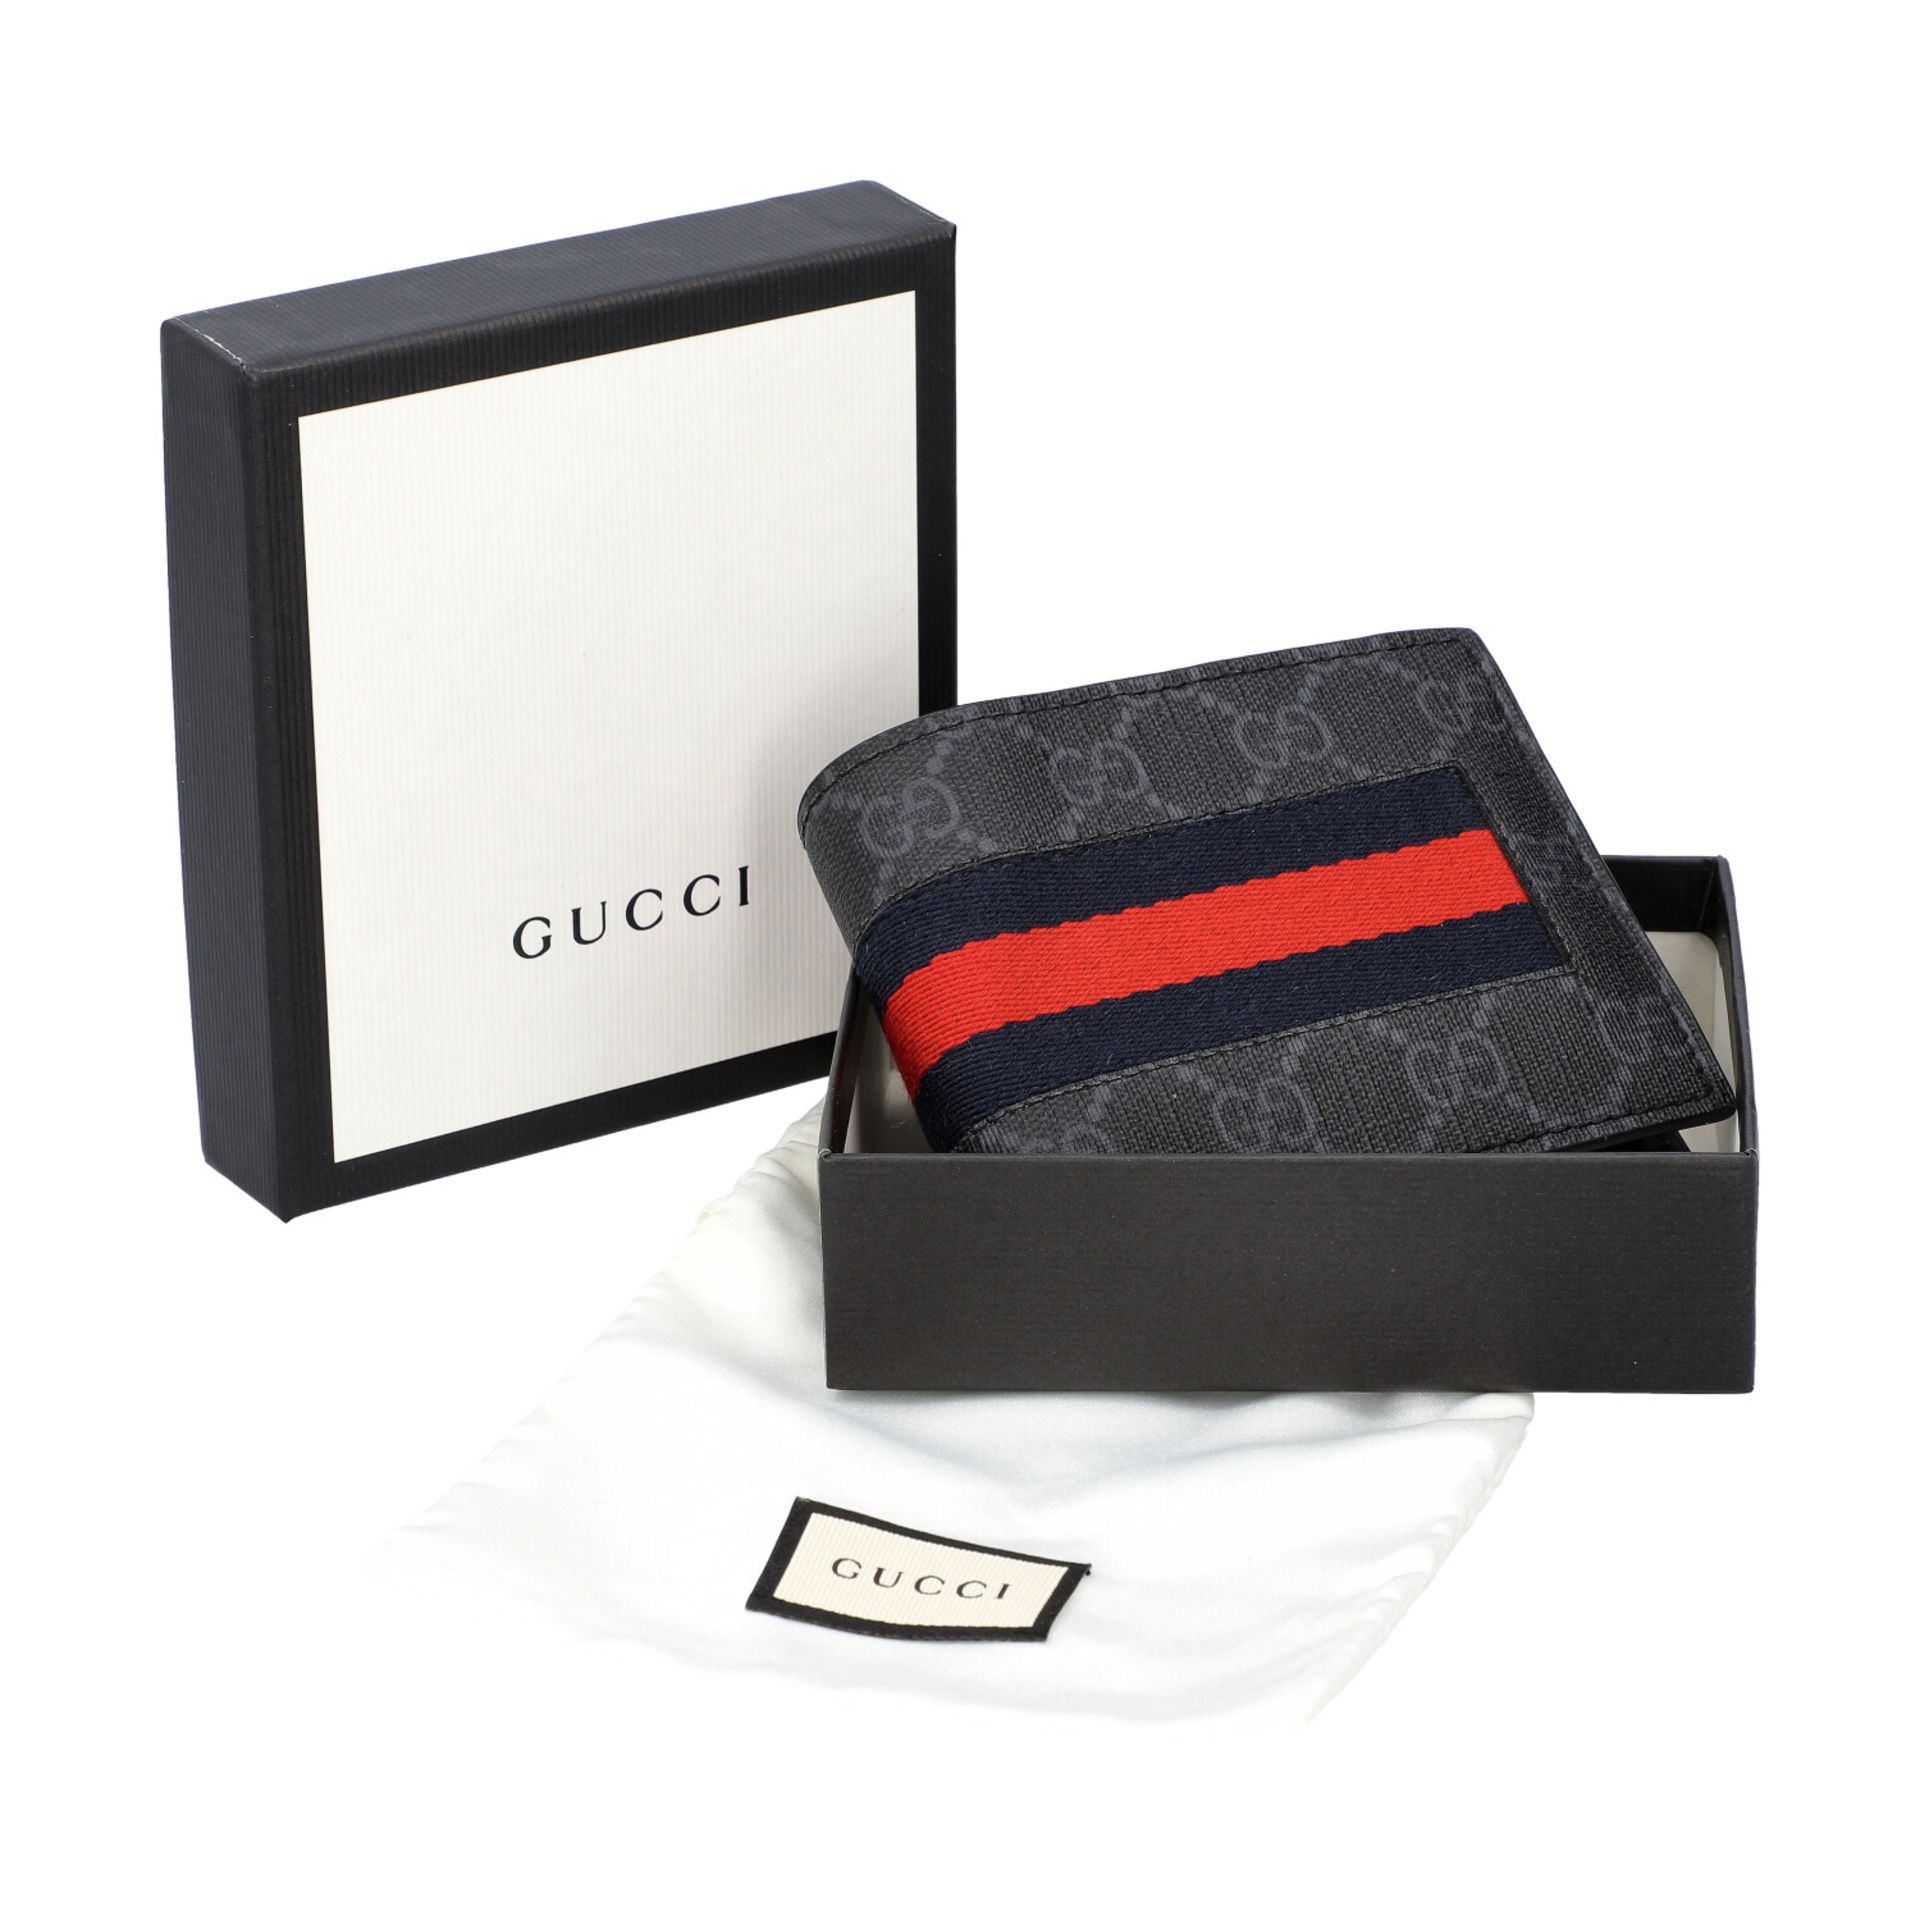 GUCCI Portemonnaie, NP.: 320€. - Image 5 of 5